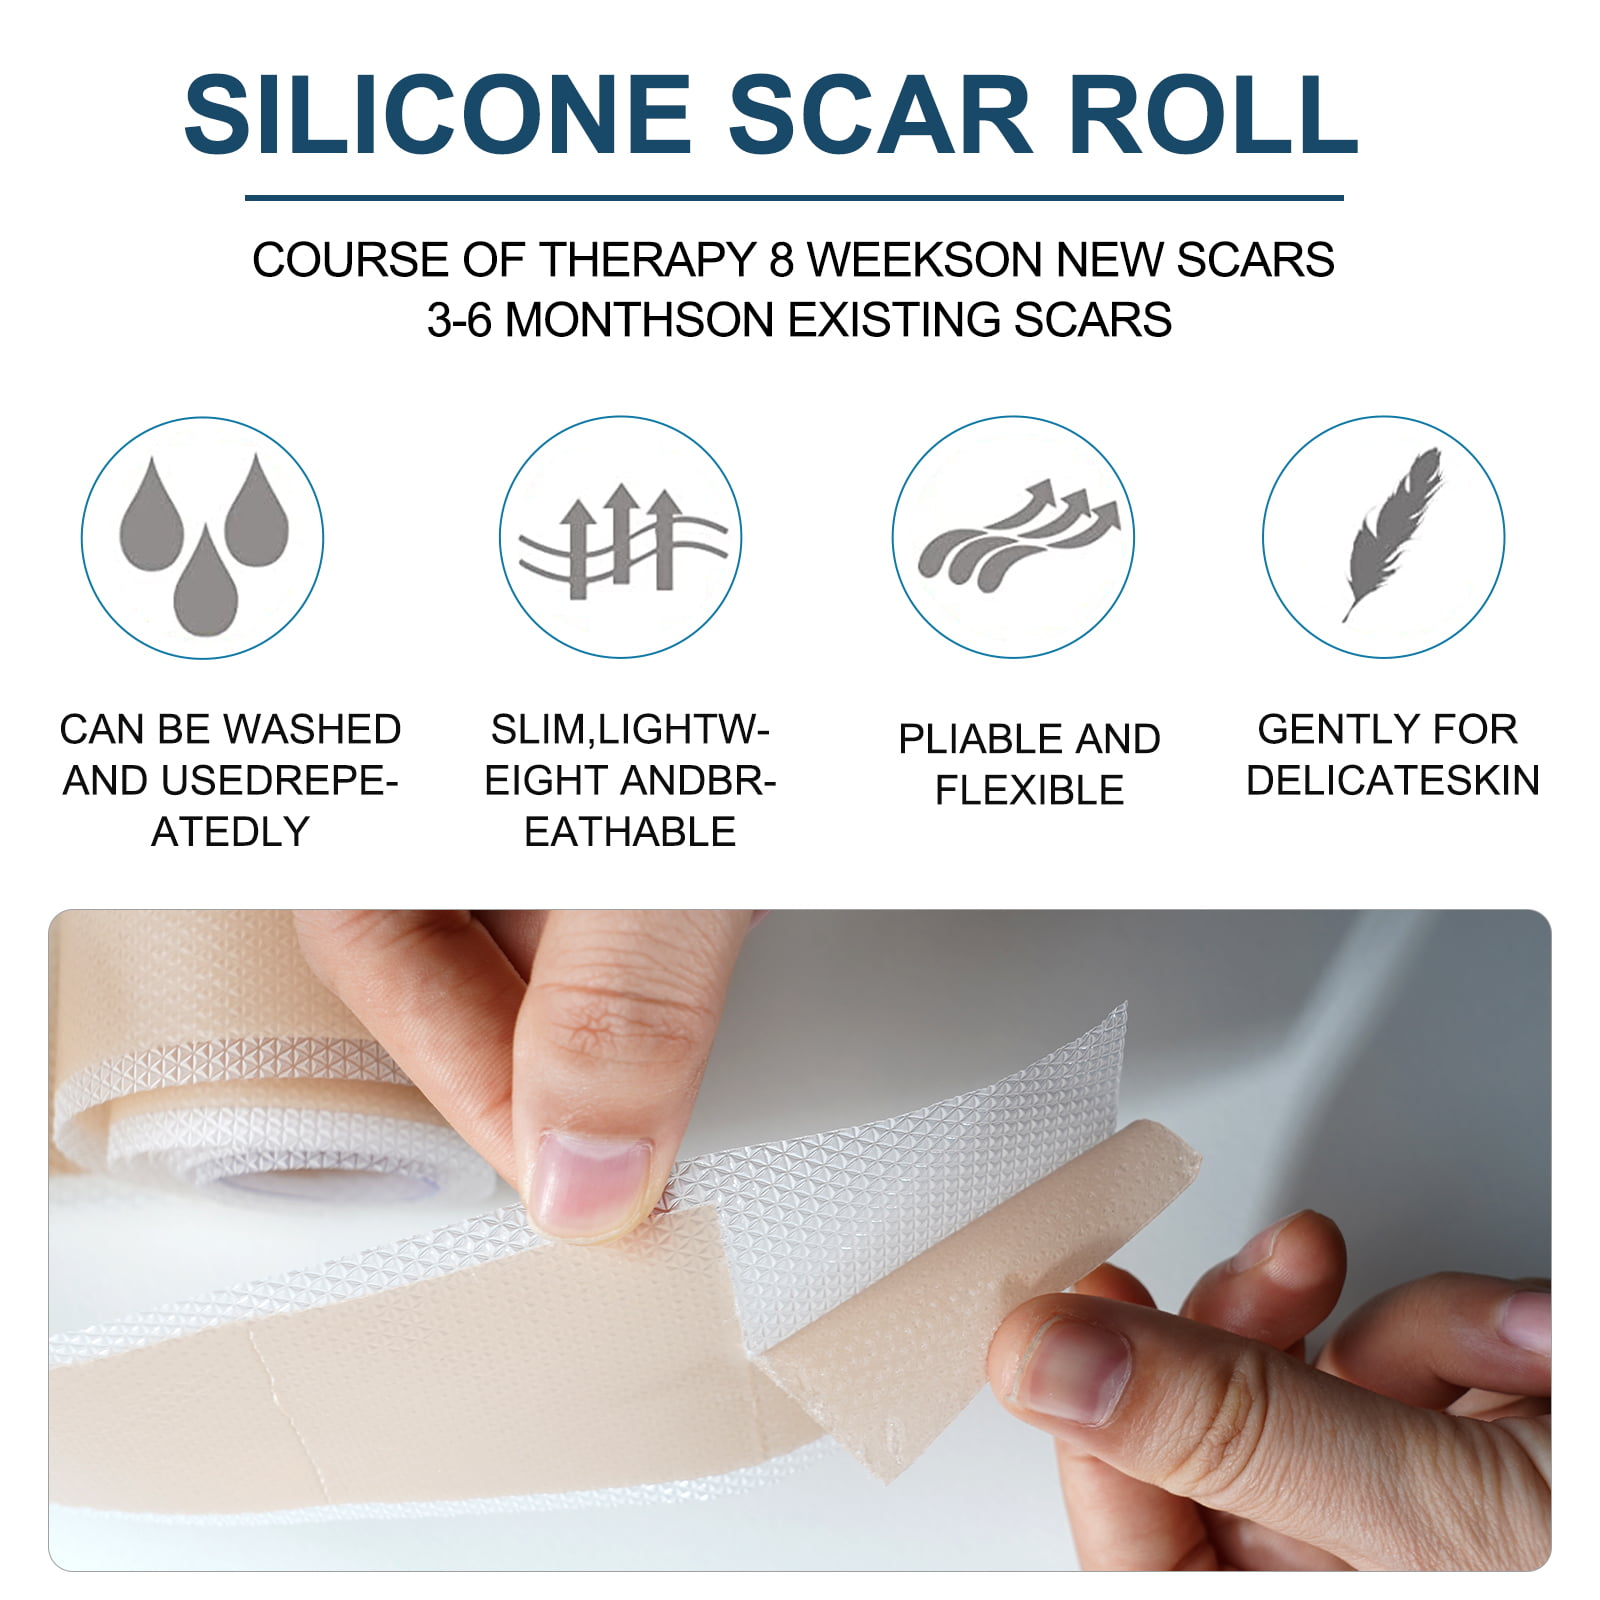 Purvigor Silicone Scar Tape Roll, 1.6” x 120” Medical Tape for Wound Care  Bandages Scars Strips for Surgical